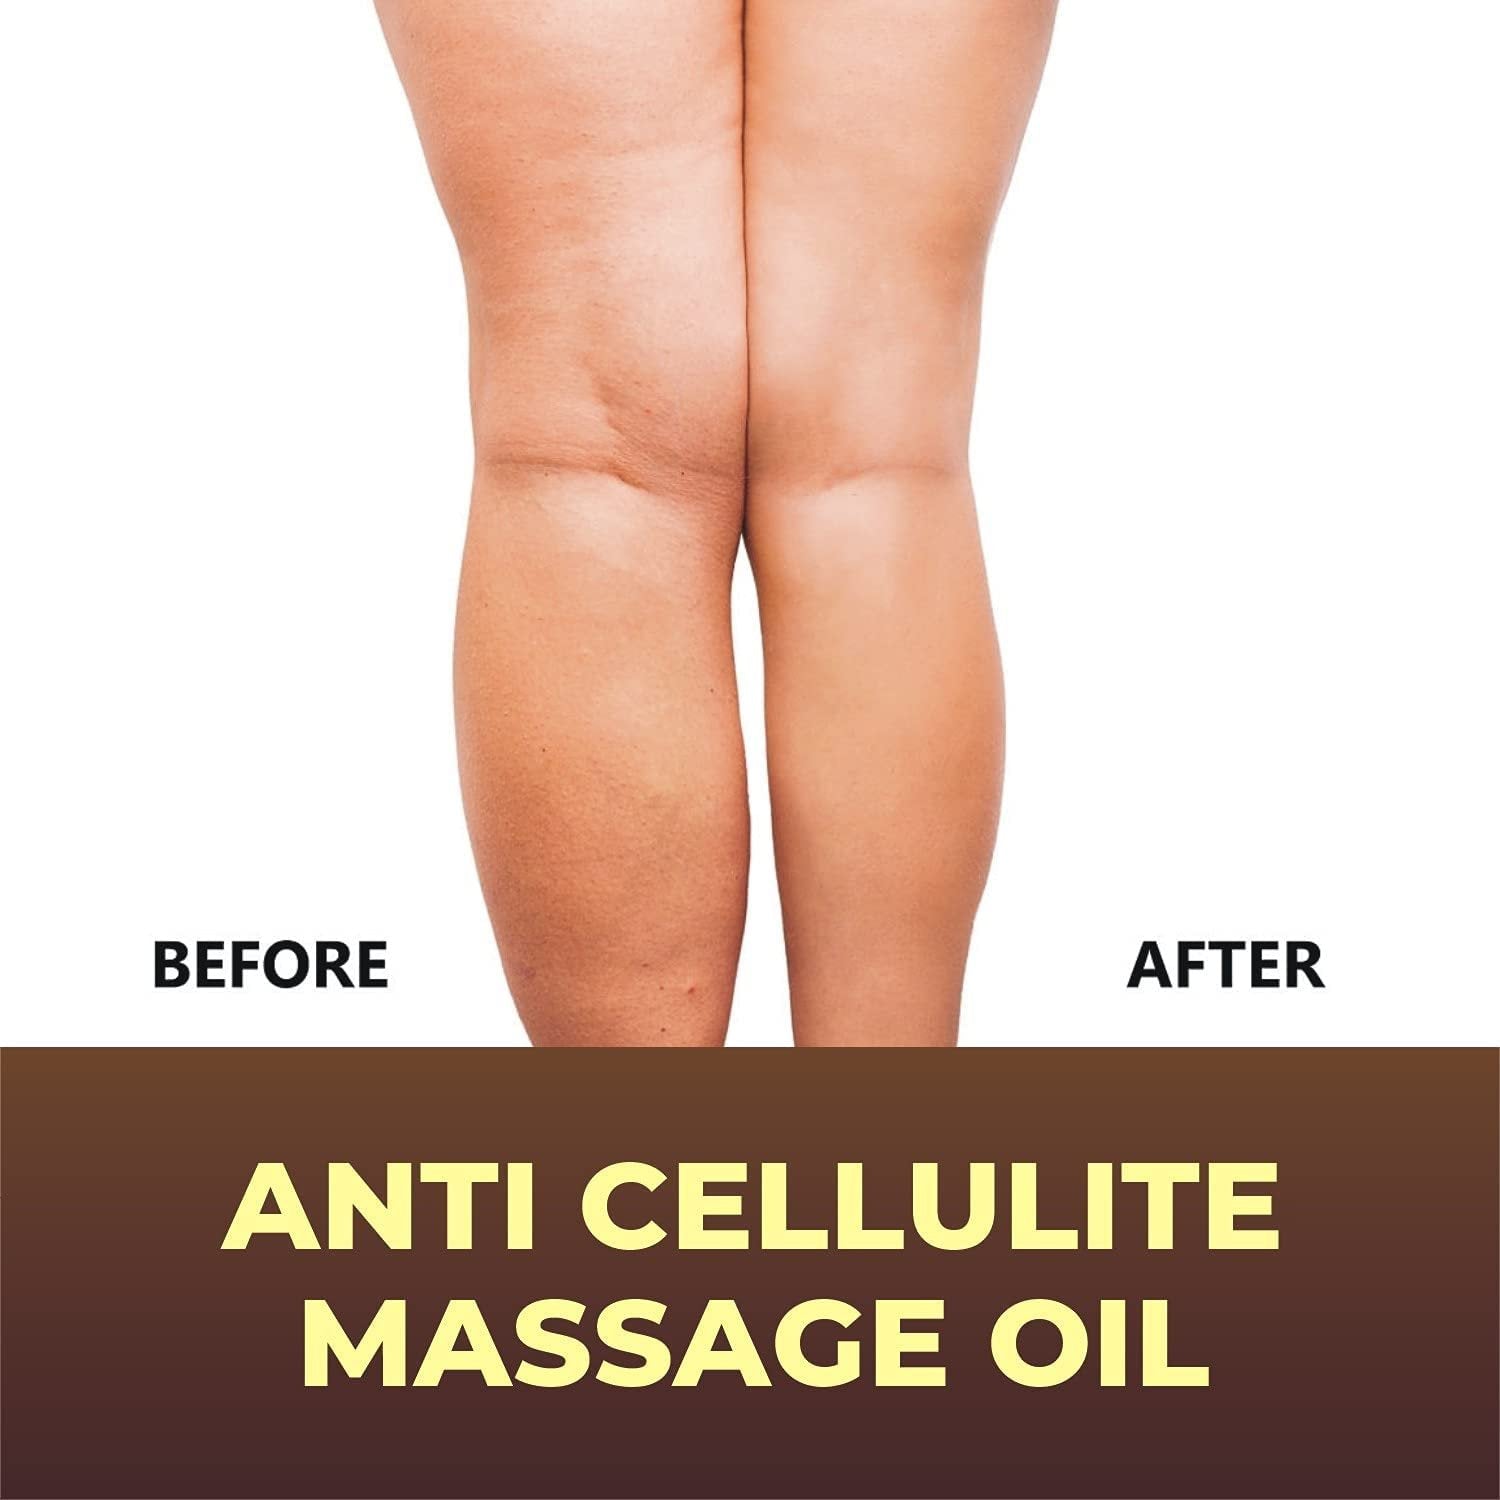 Natural Anti Cellulite Massage Oil - Infused w/ Collagen & Stem Cell - 100% Natural Massage Lotion & Cellulite Cream & Remover-Helps Skin Tightening and Stretch Mark Treatment for Women & Men - 8 oz